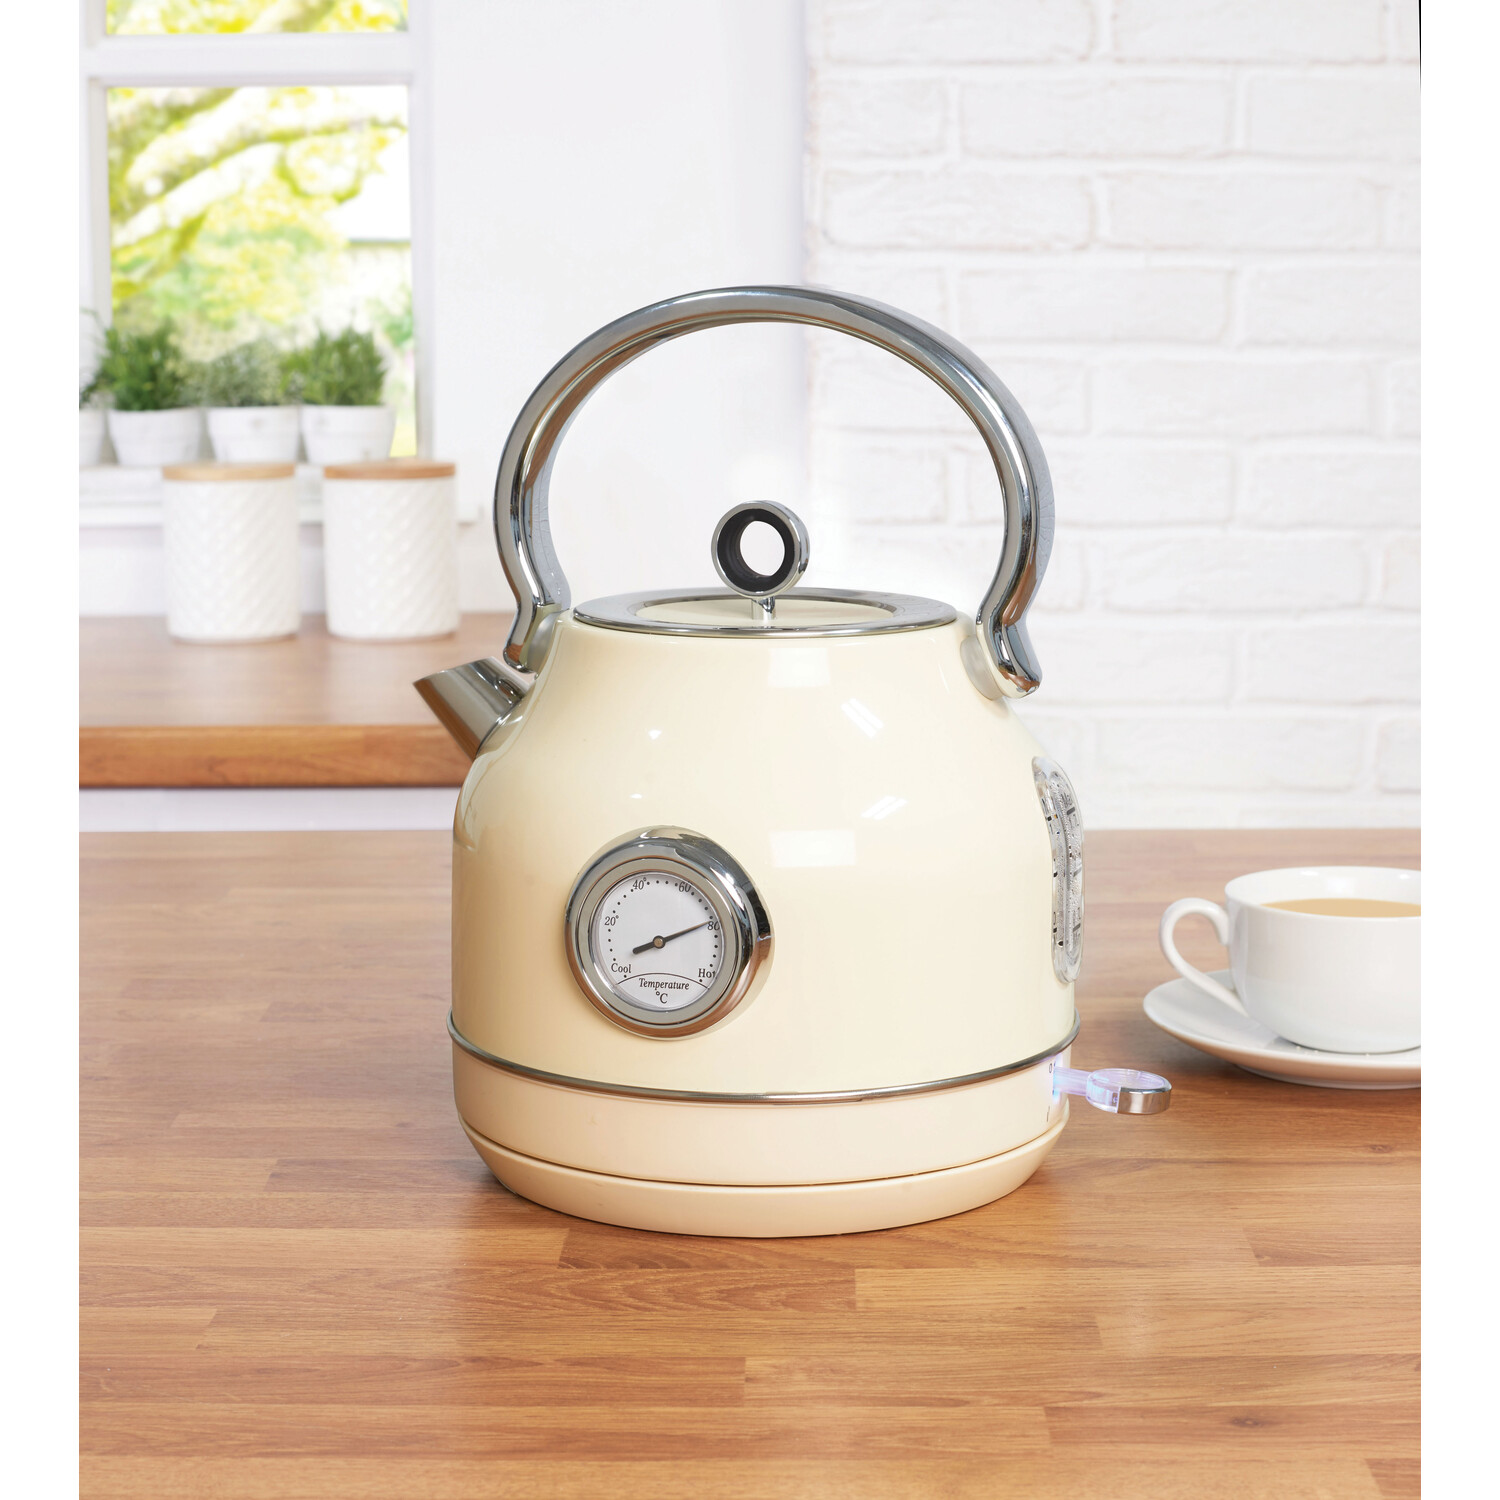 Cream Retro Kettle with Dial 1.7L Image 2